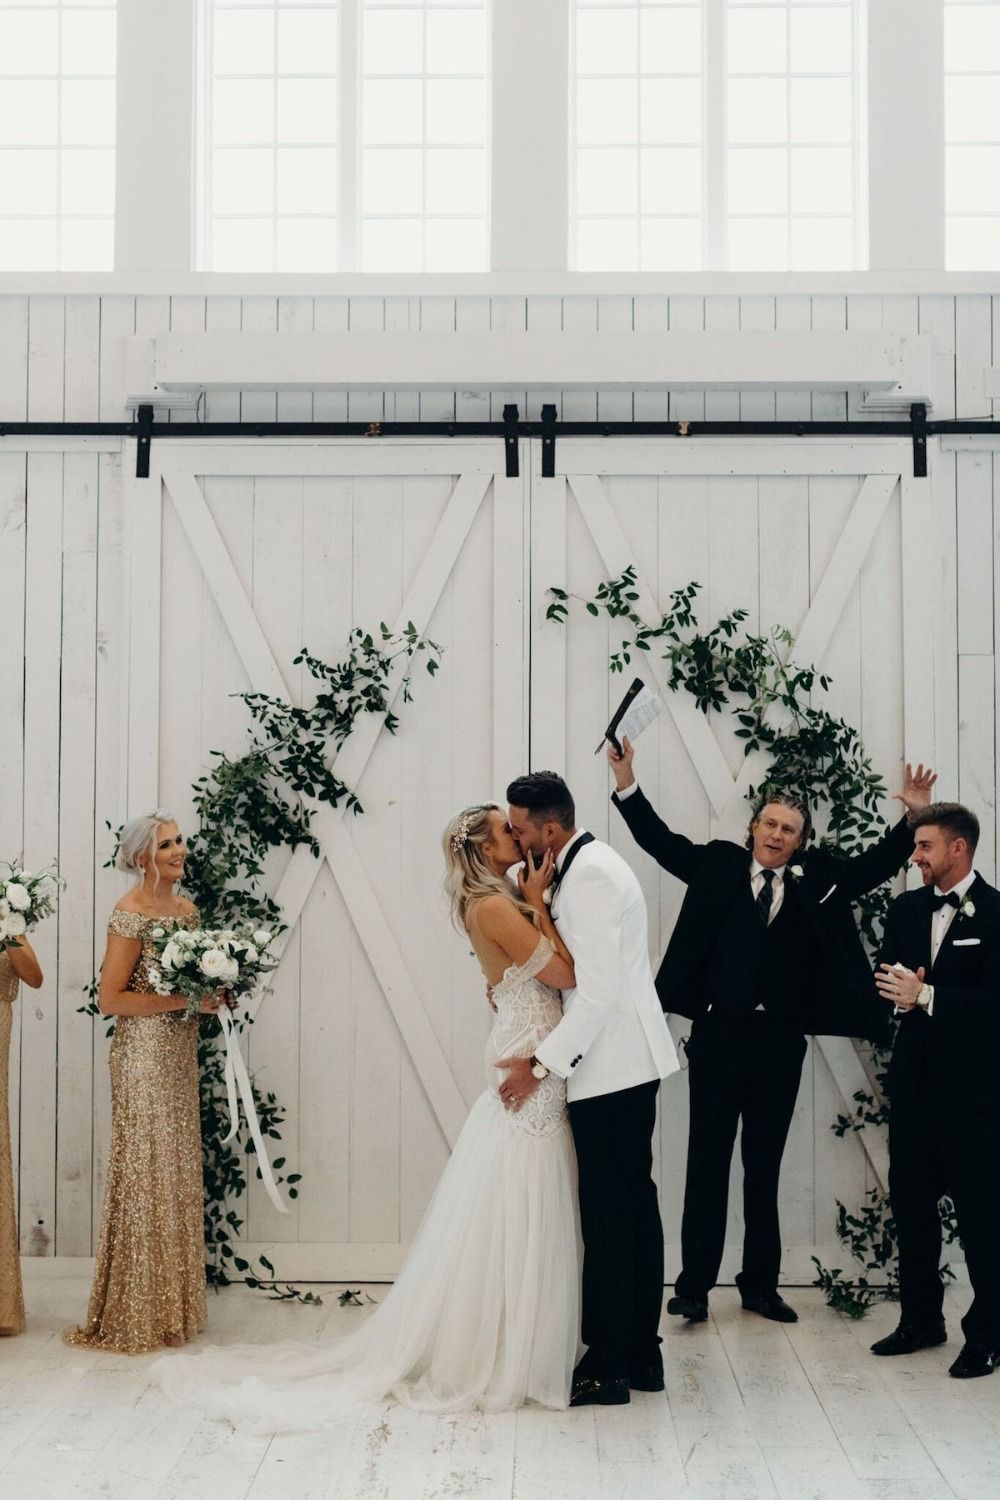 A Gorgeous Minimal White-Washed Barn Wedding in All White -   17 wedding Outdoor country ideas